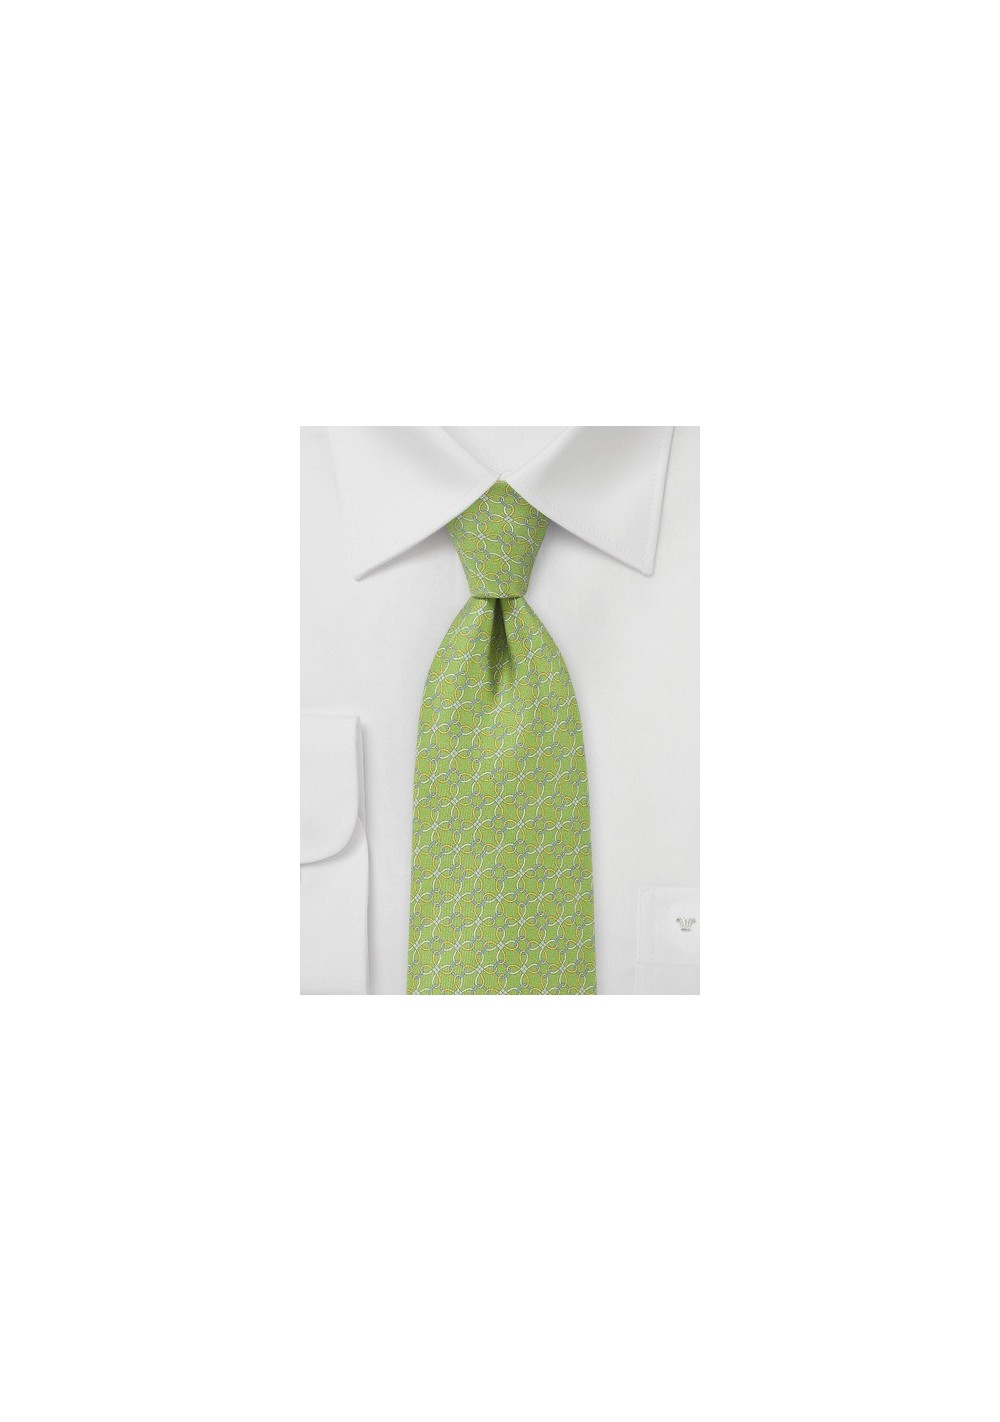 Chic Graphic Tie in Lime and Yellows